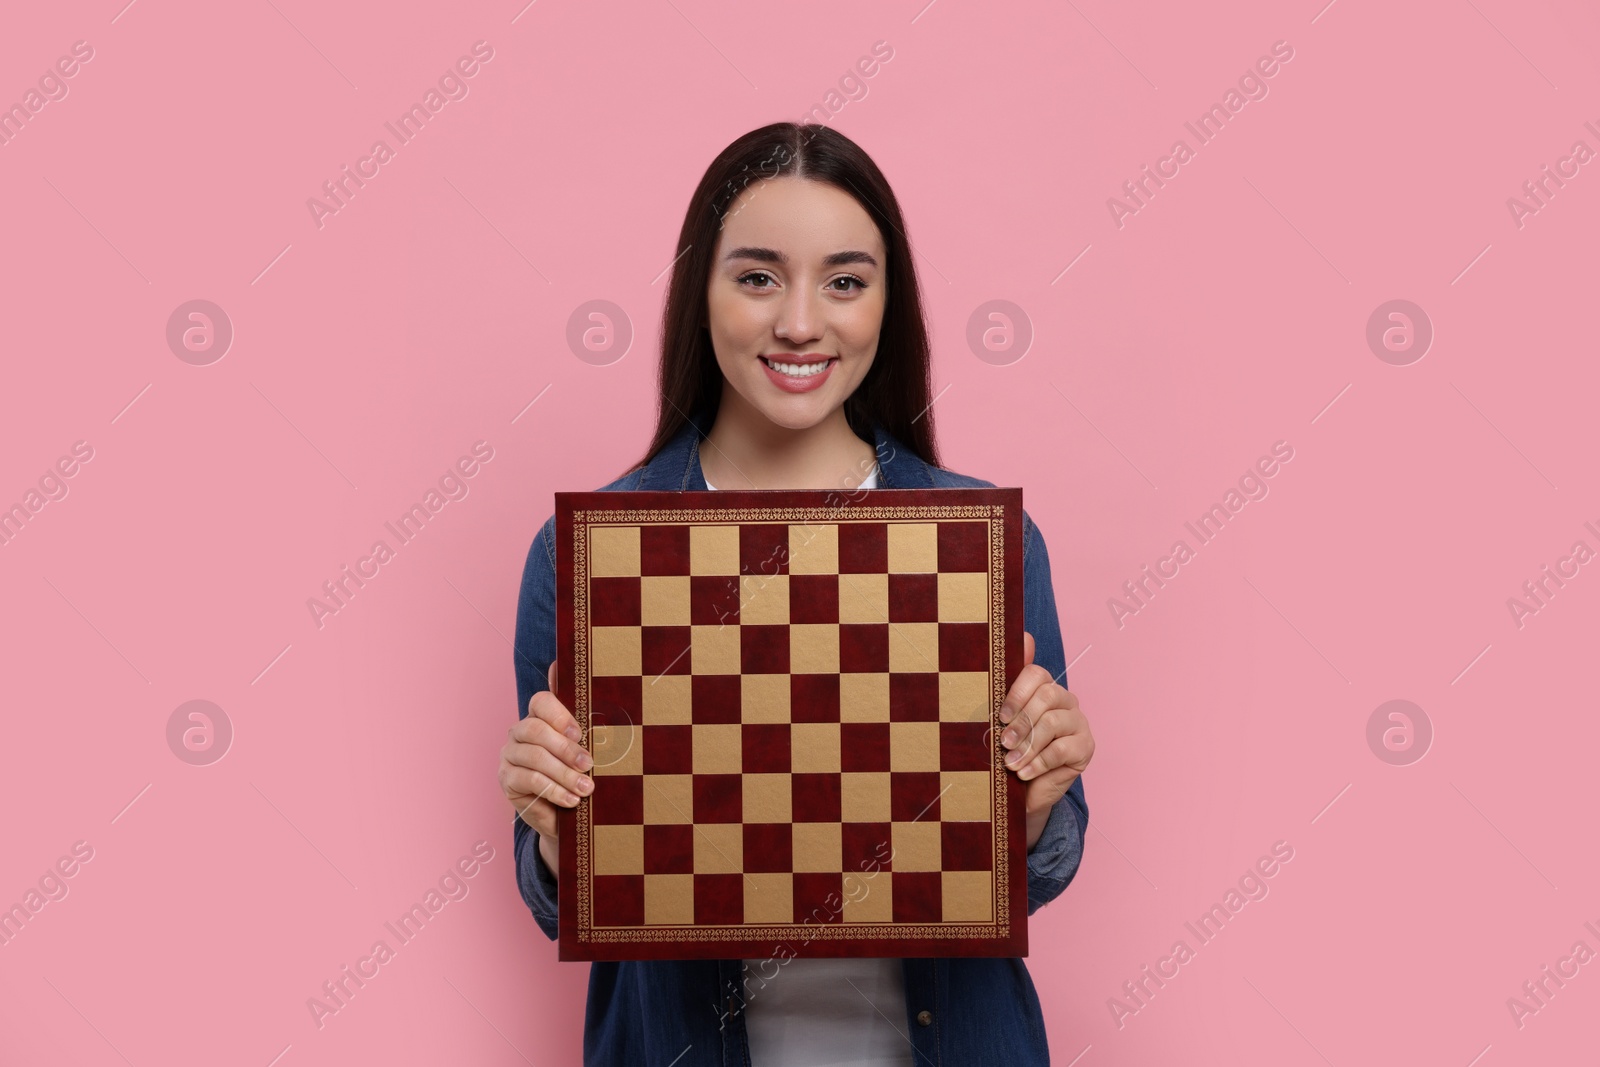 Photo of Happy woman with chessboard on pink background